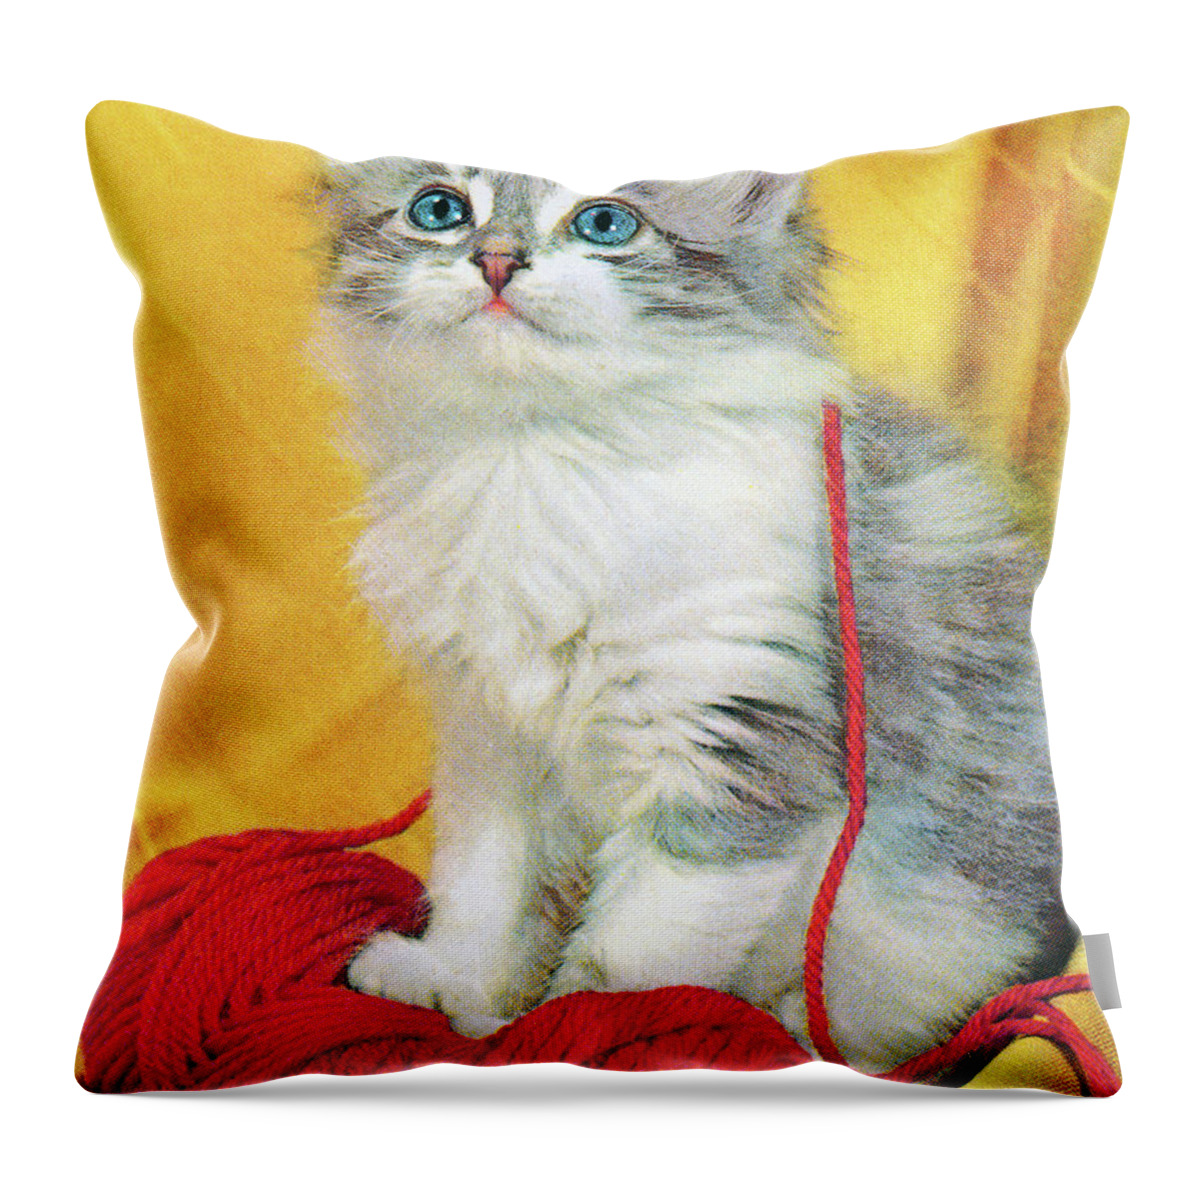 Animal Throw Pillow featuring the drawing Grey Kitten With Yarn by CSA Images